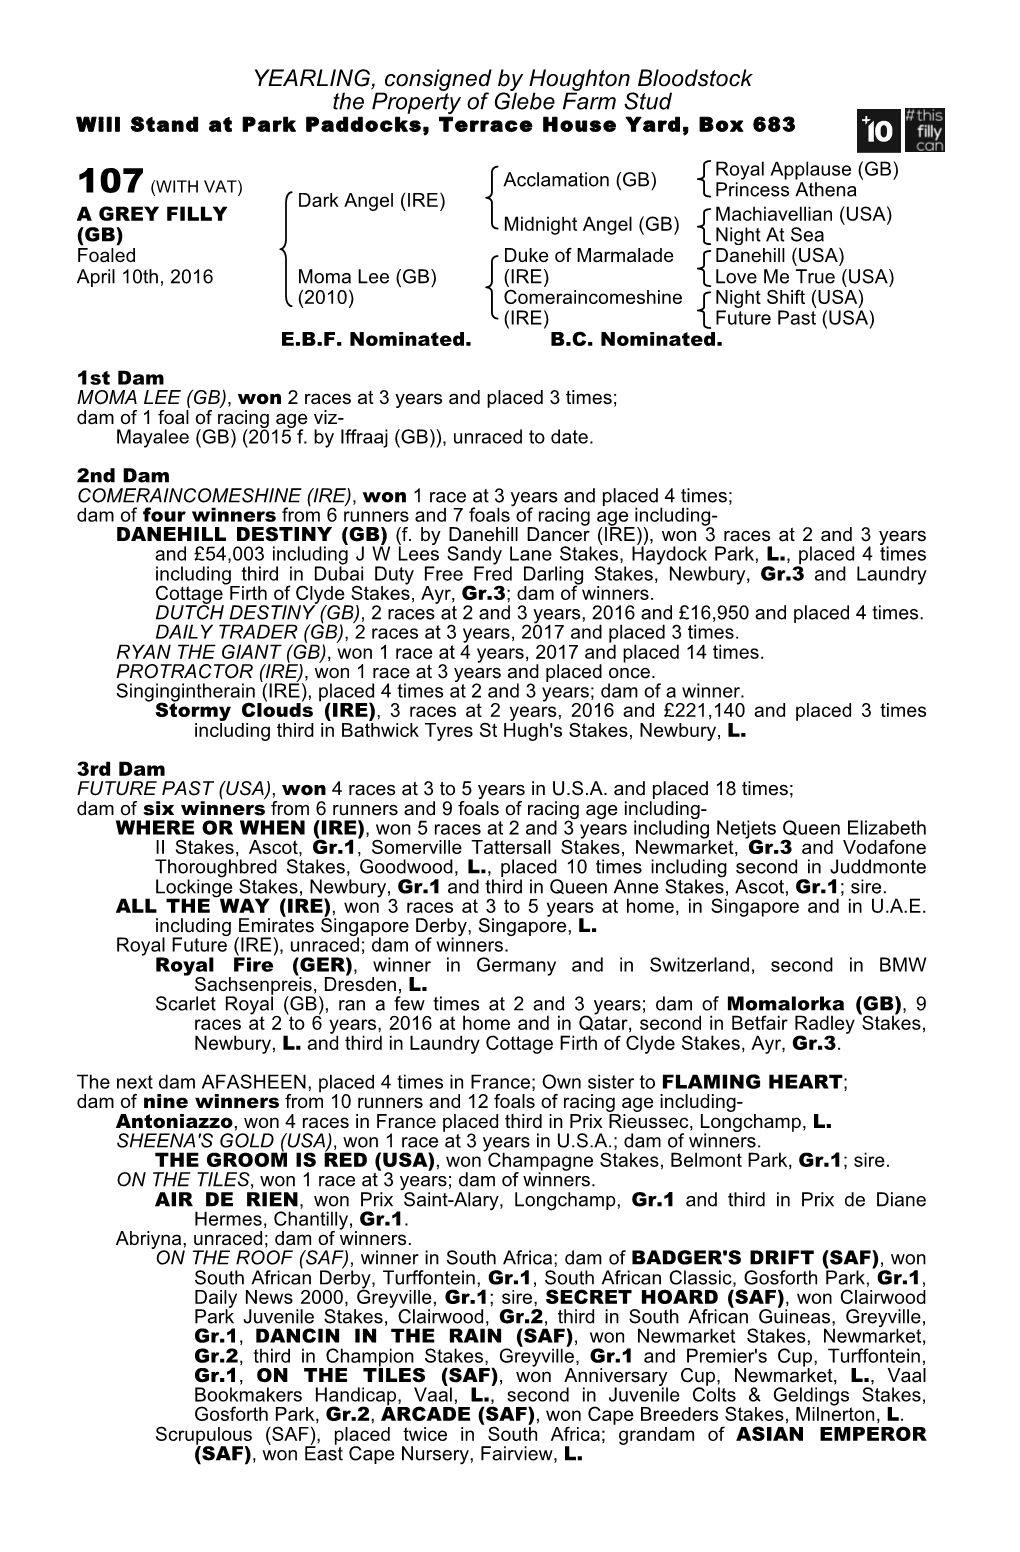 YEARLING, Consigned by Houghton Bloodstock the Property of Glebe Farm Stud Will Stand at Park Paddocks, Terrace House Yard, Box 683